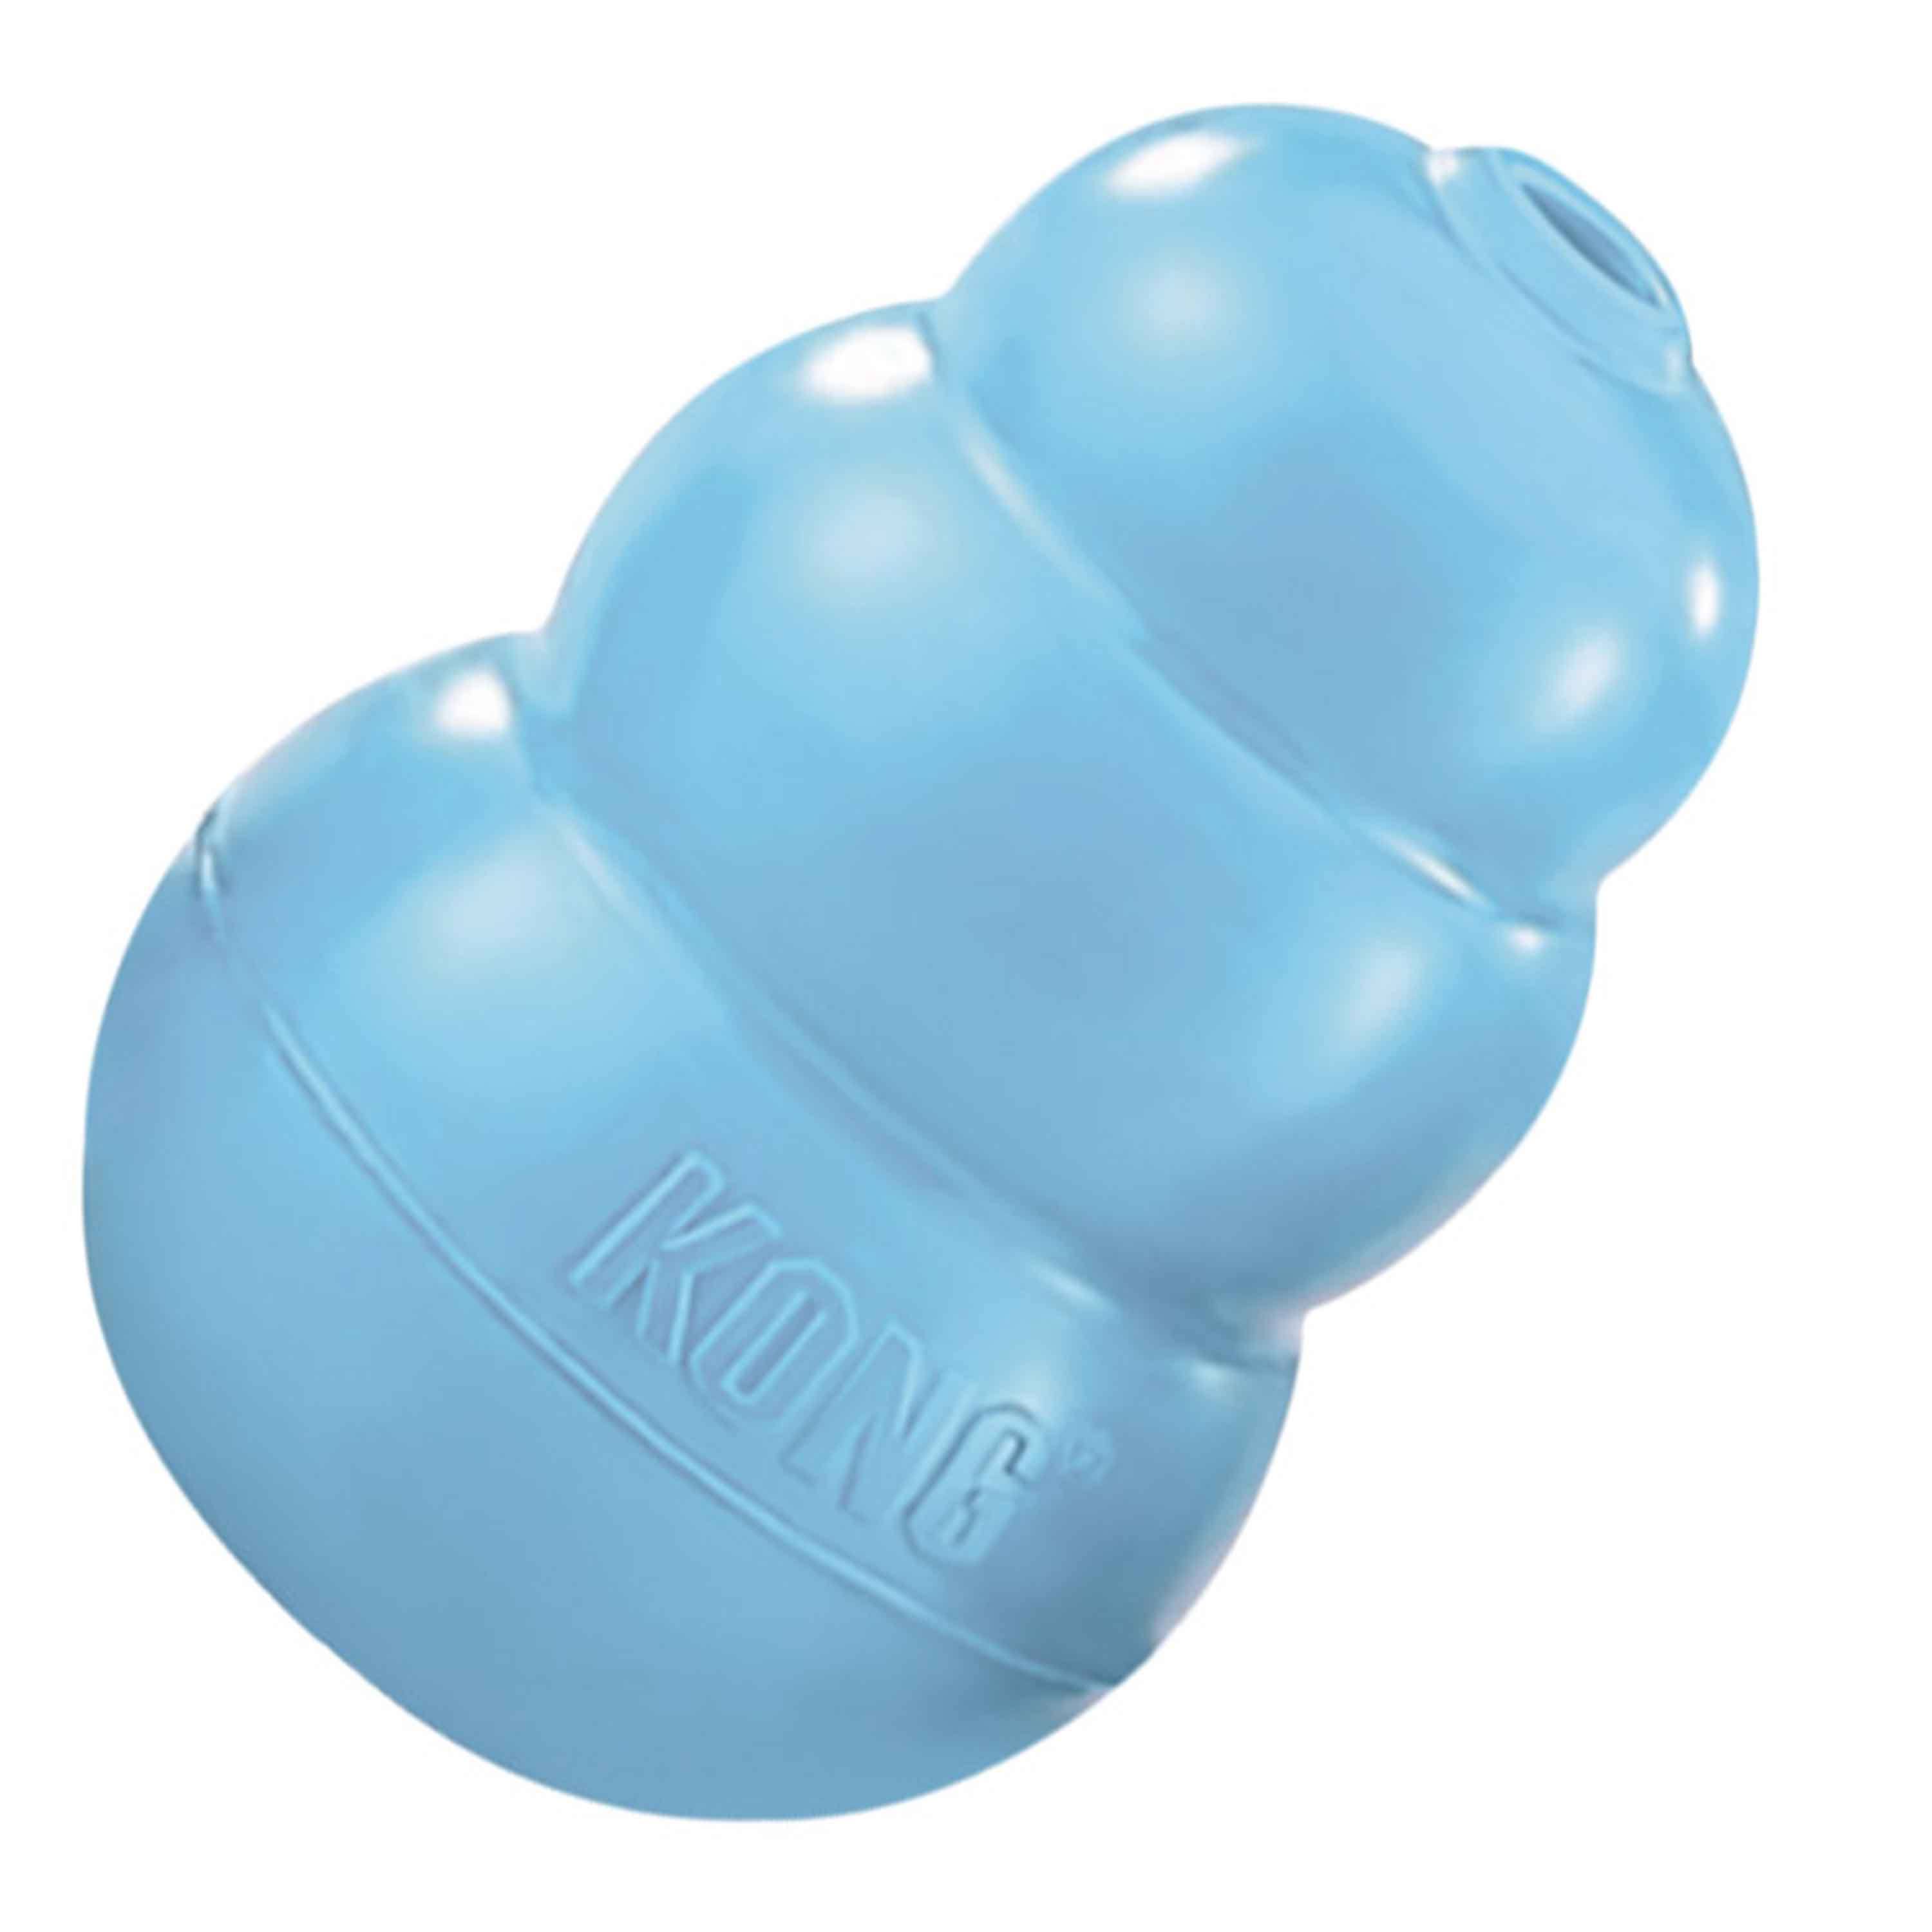 Kong Puppy Dog Toy - Small, Blue